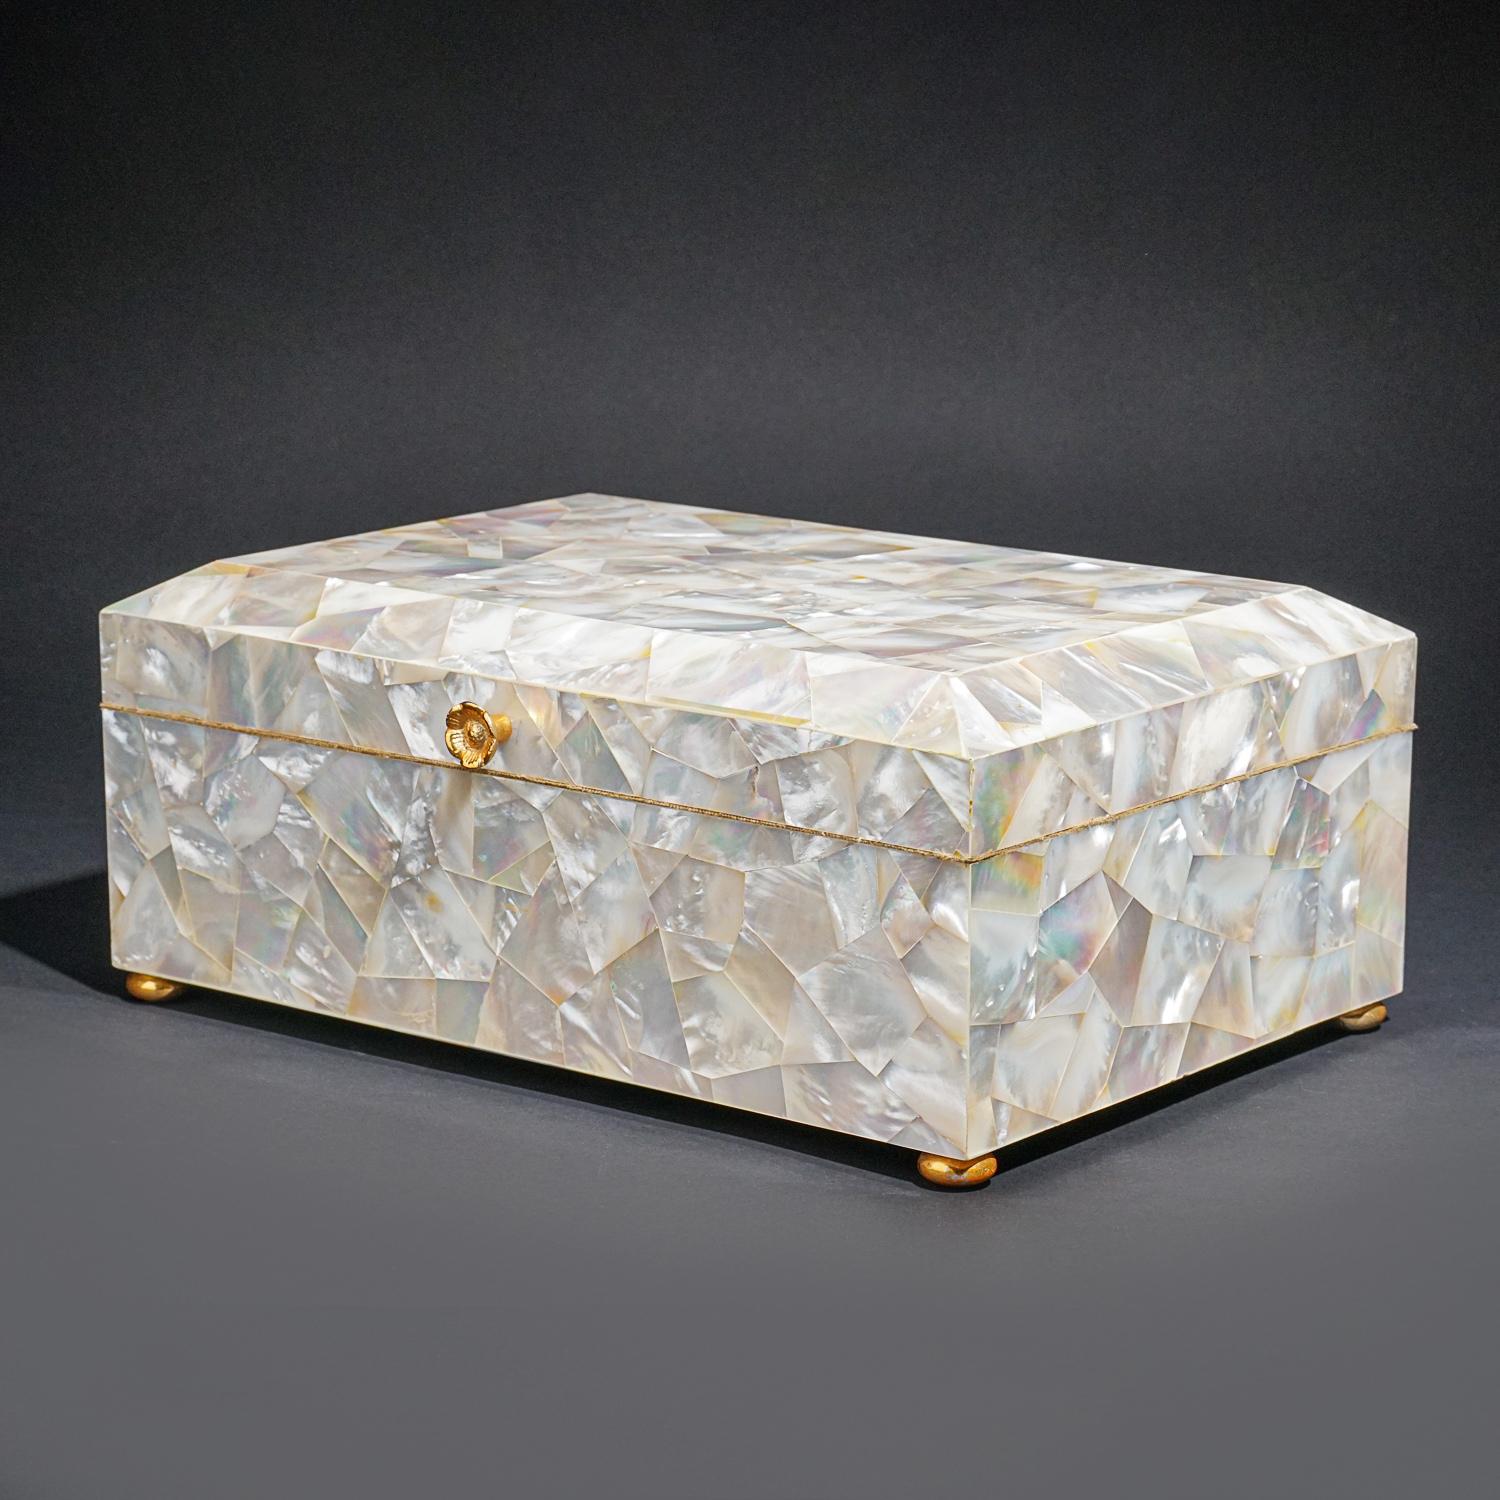 Contemporary Genuine Large Mother of Pearl Decorative Jewelry Box (12